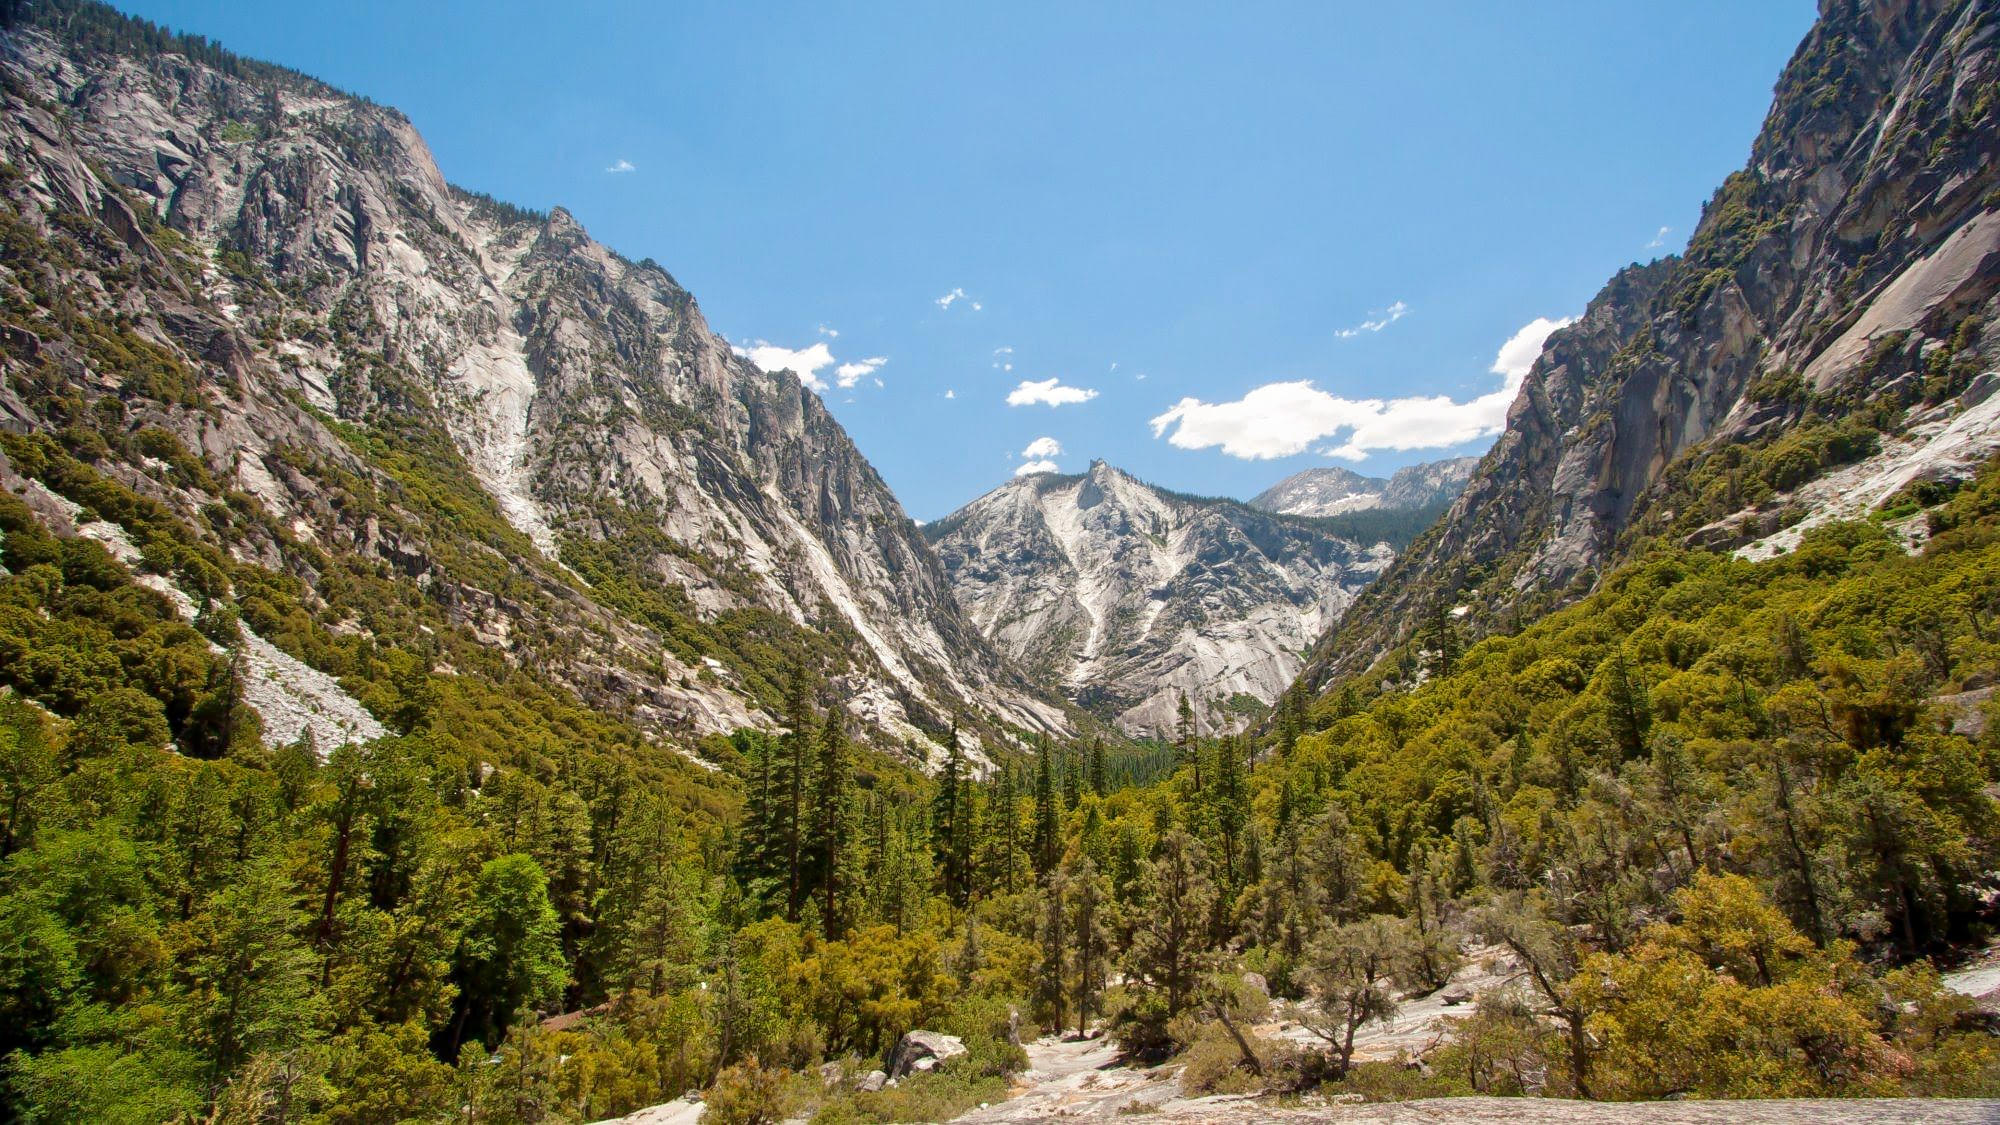 Kings Canyon National Park Overview